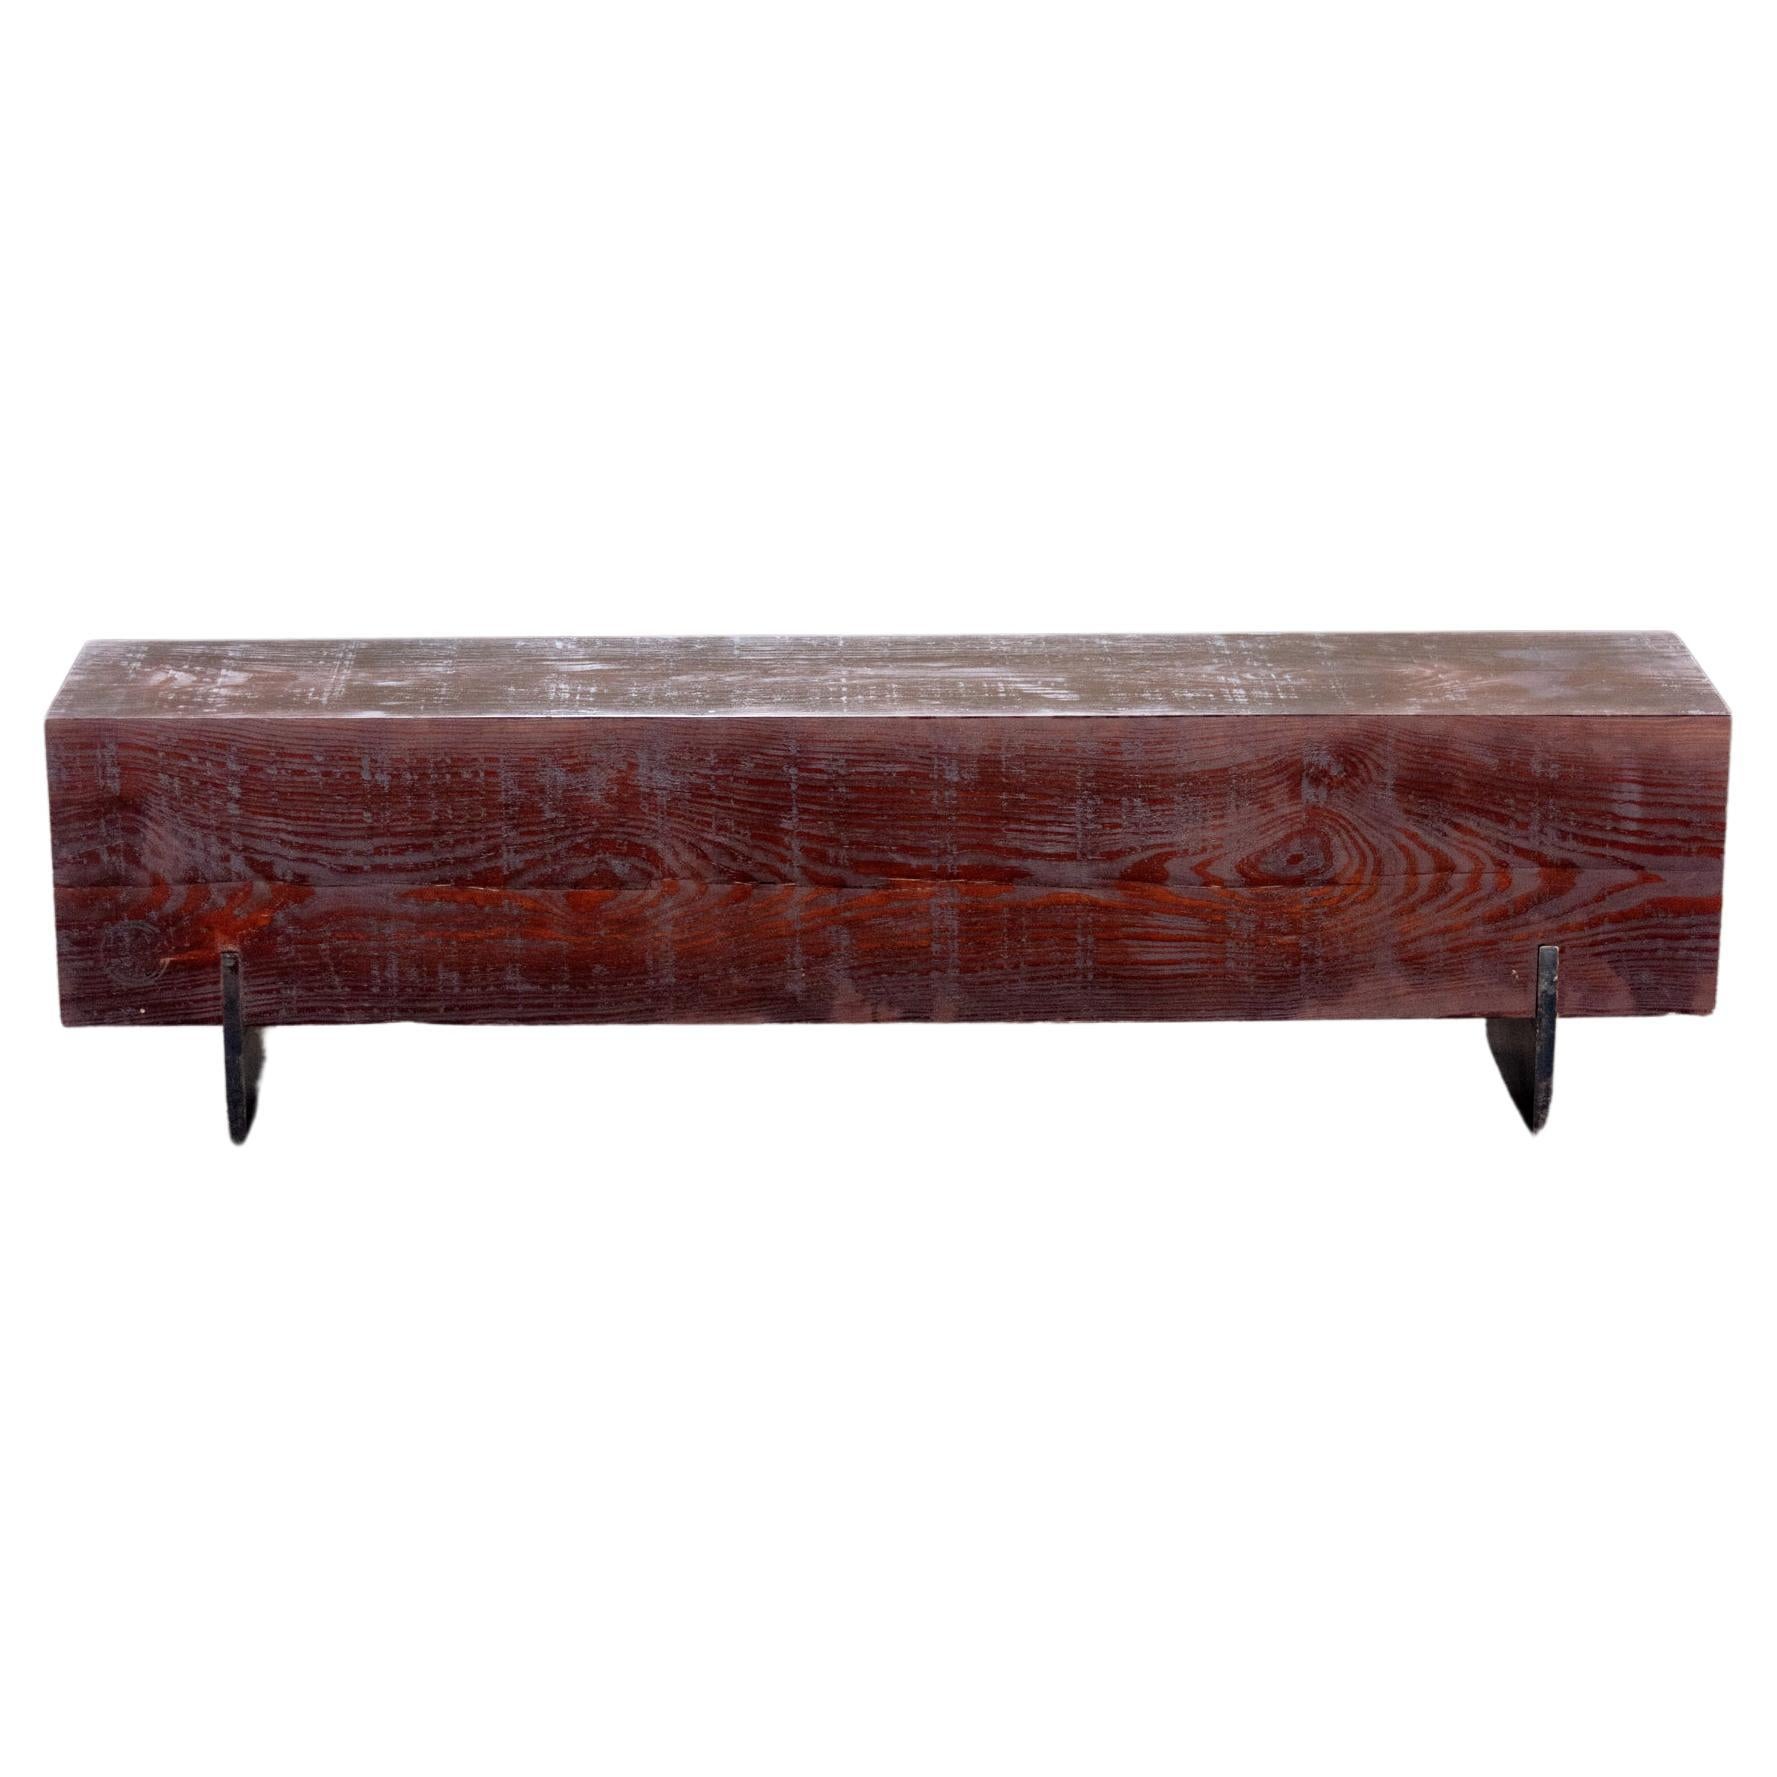 Rustic Beam Bench  Stained Pine  Blackened Steel  by Alabama Sawyer